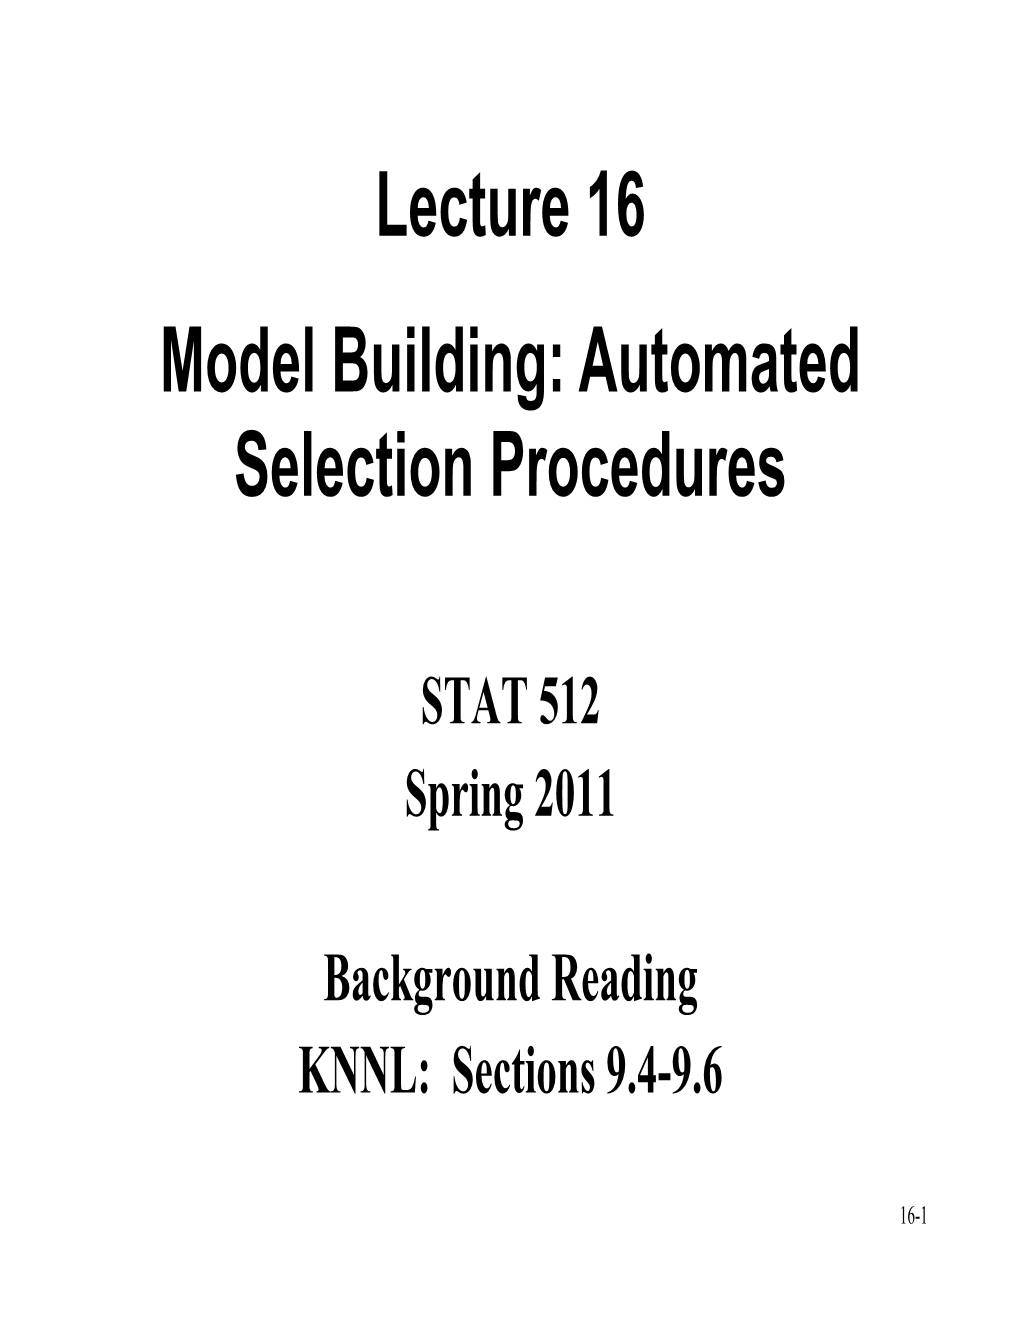 Lecture 16 Model Building: Automated Selection Procedures